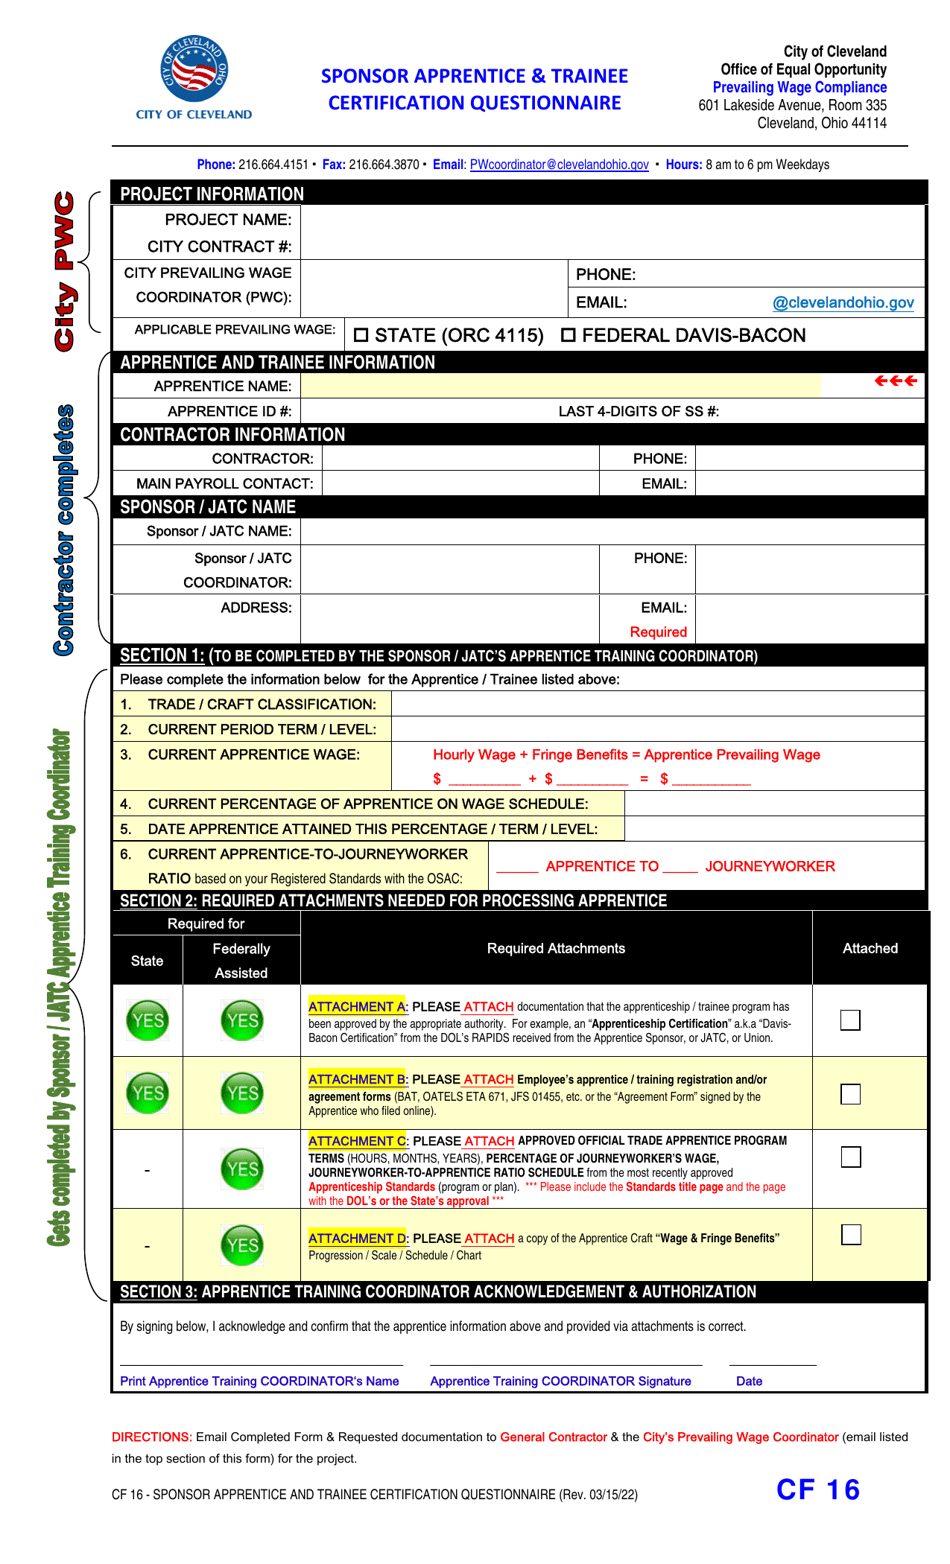 Form CF16 Sponsor Apprentice  Trainee Certification Questionnaire - City of Cleveland, Ohio, Page 1